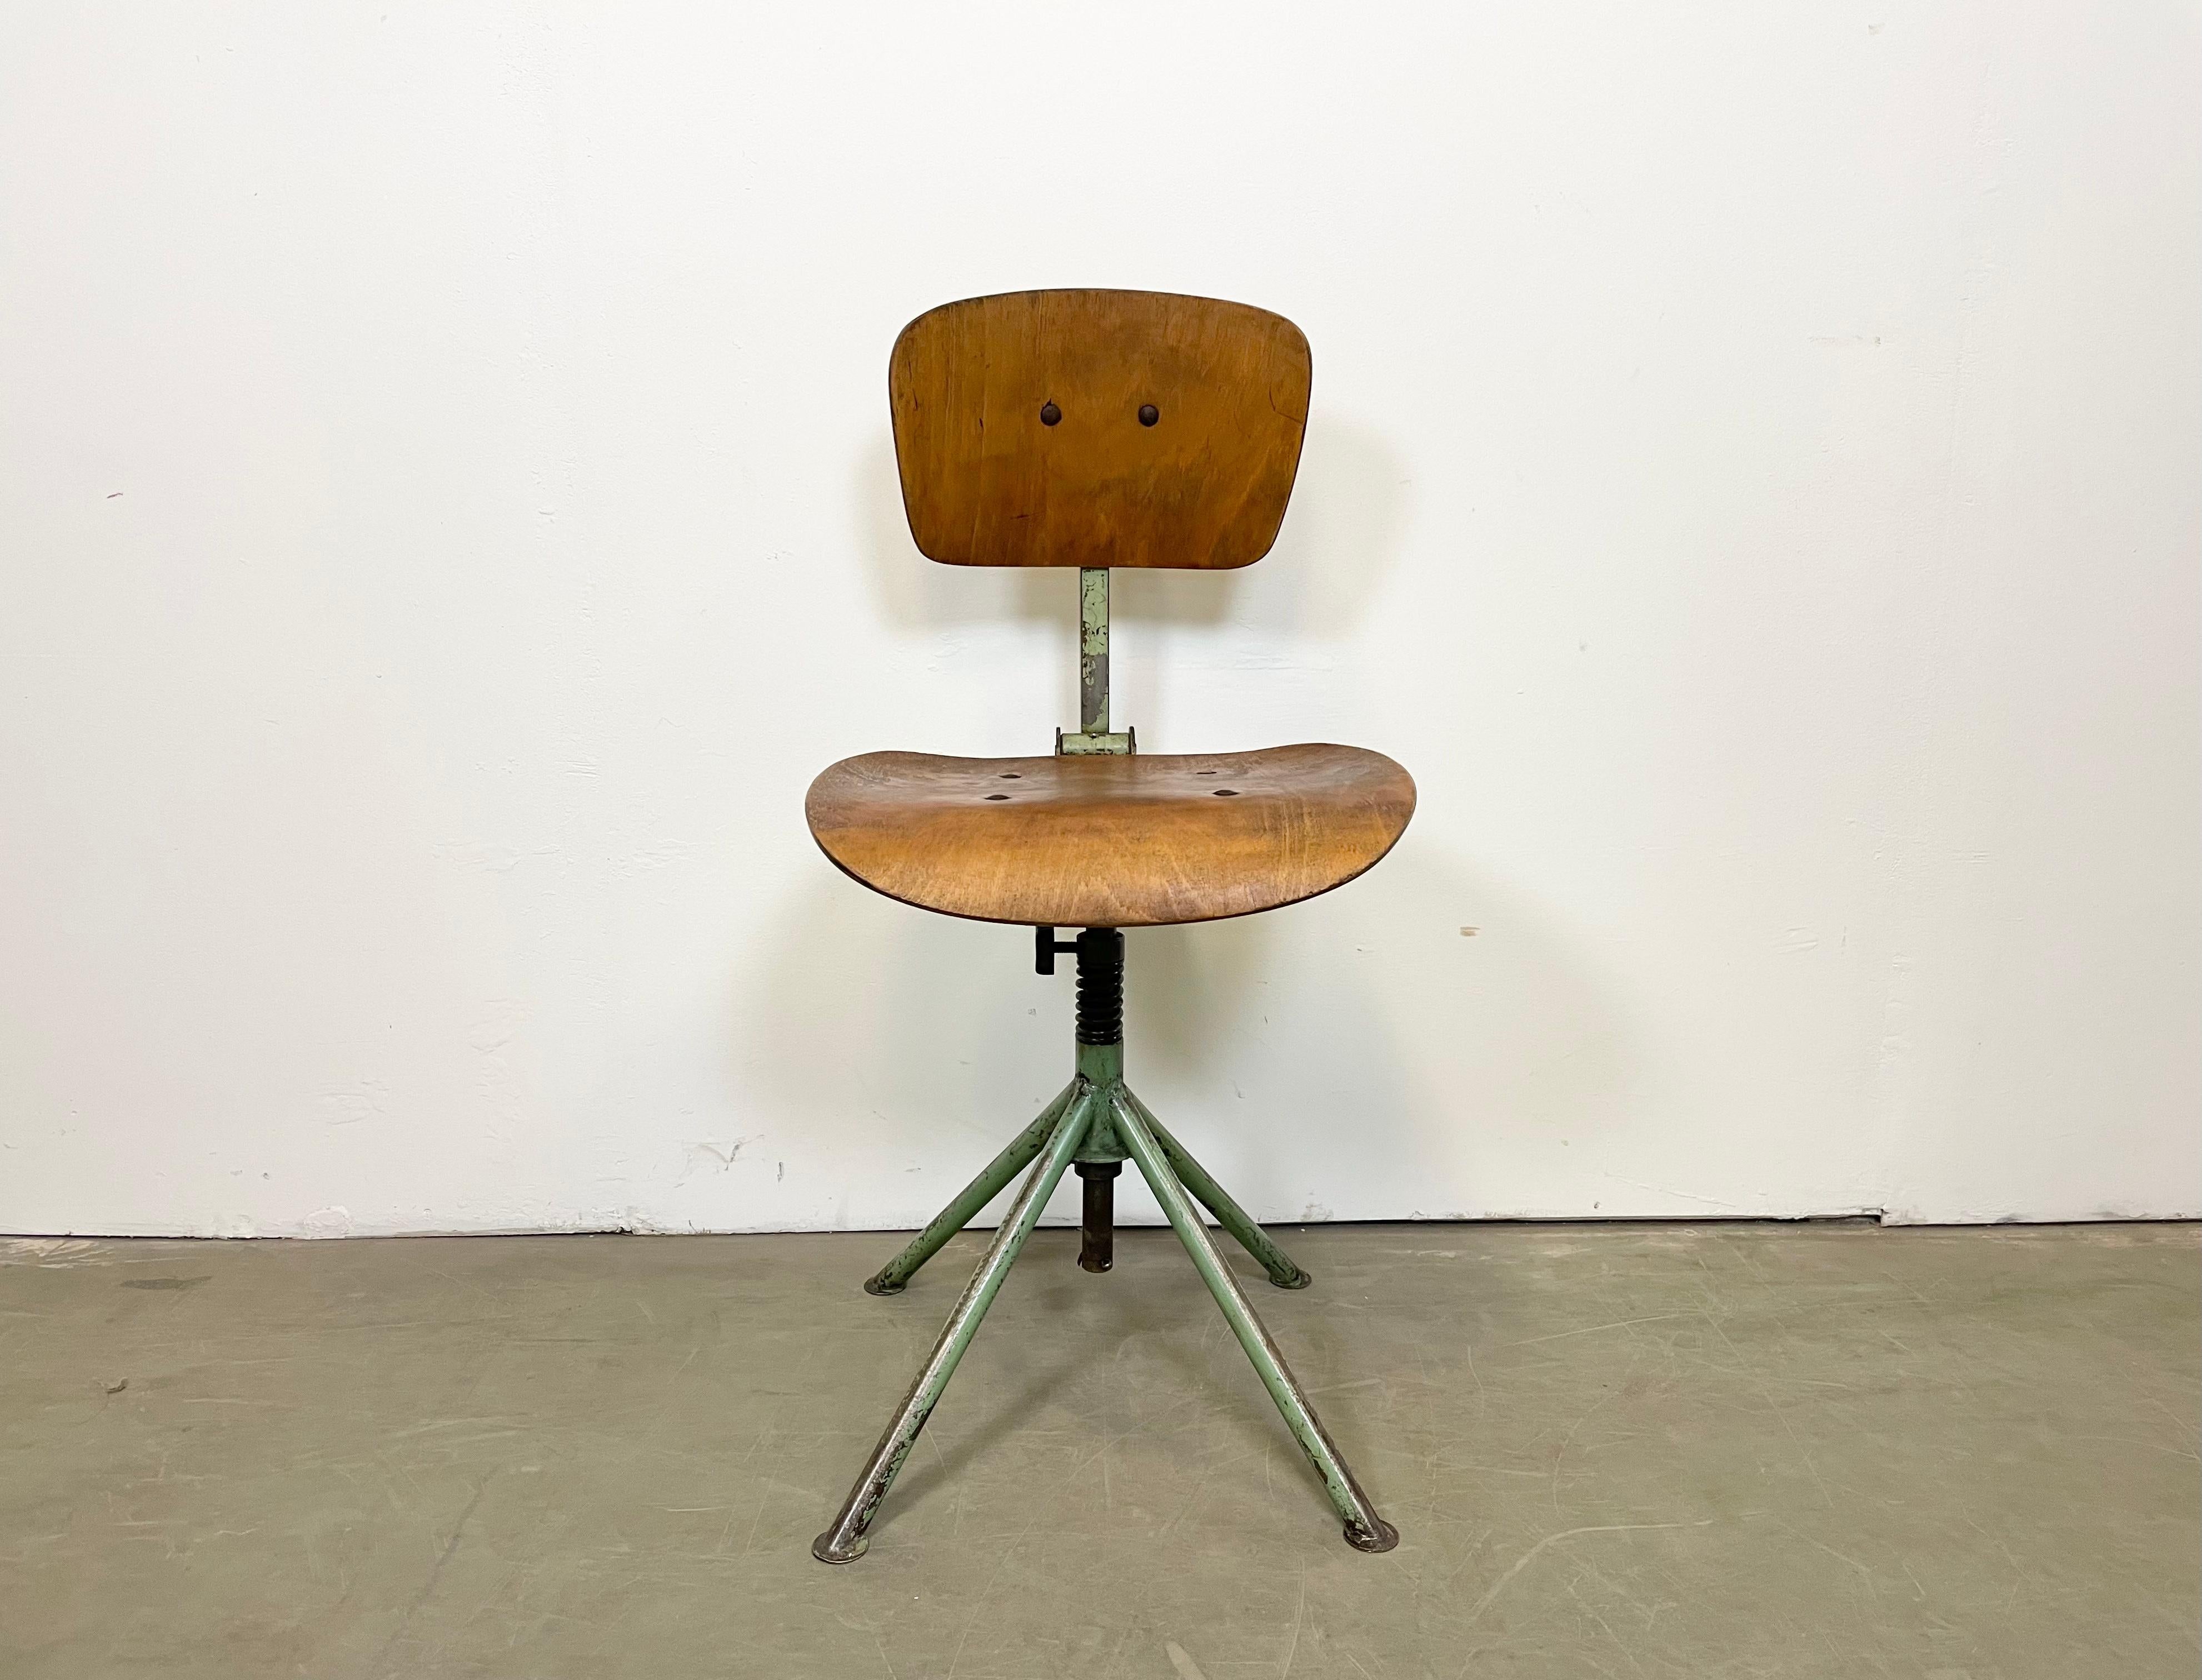 This industrial height adjustable, rotating chair was made in former Czechoslovakia during the 1950s.It features an iron construction and a plywood seat and backrest. The weight of the chair is 8 kg.
Dimensions:
Total height : 91 - 97 cm
Seat